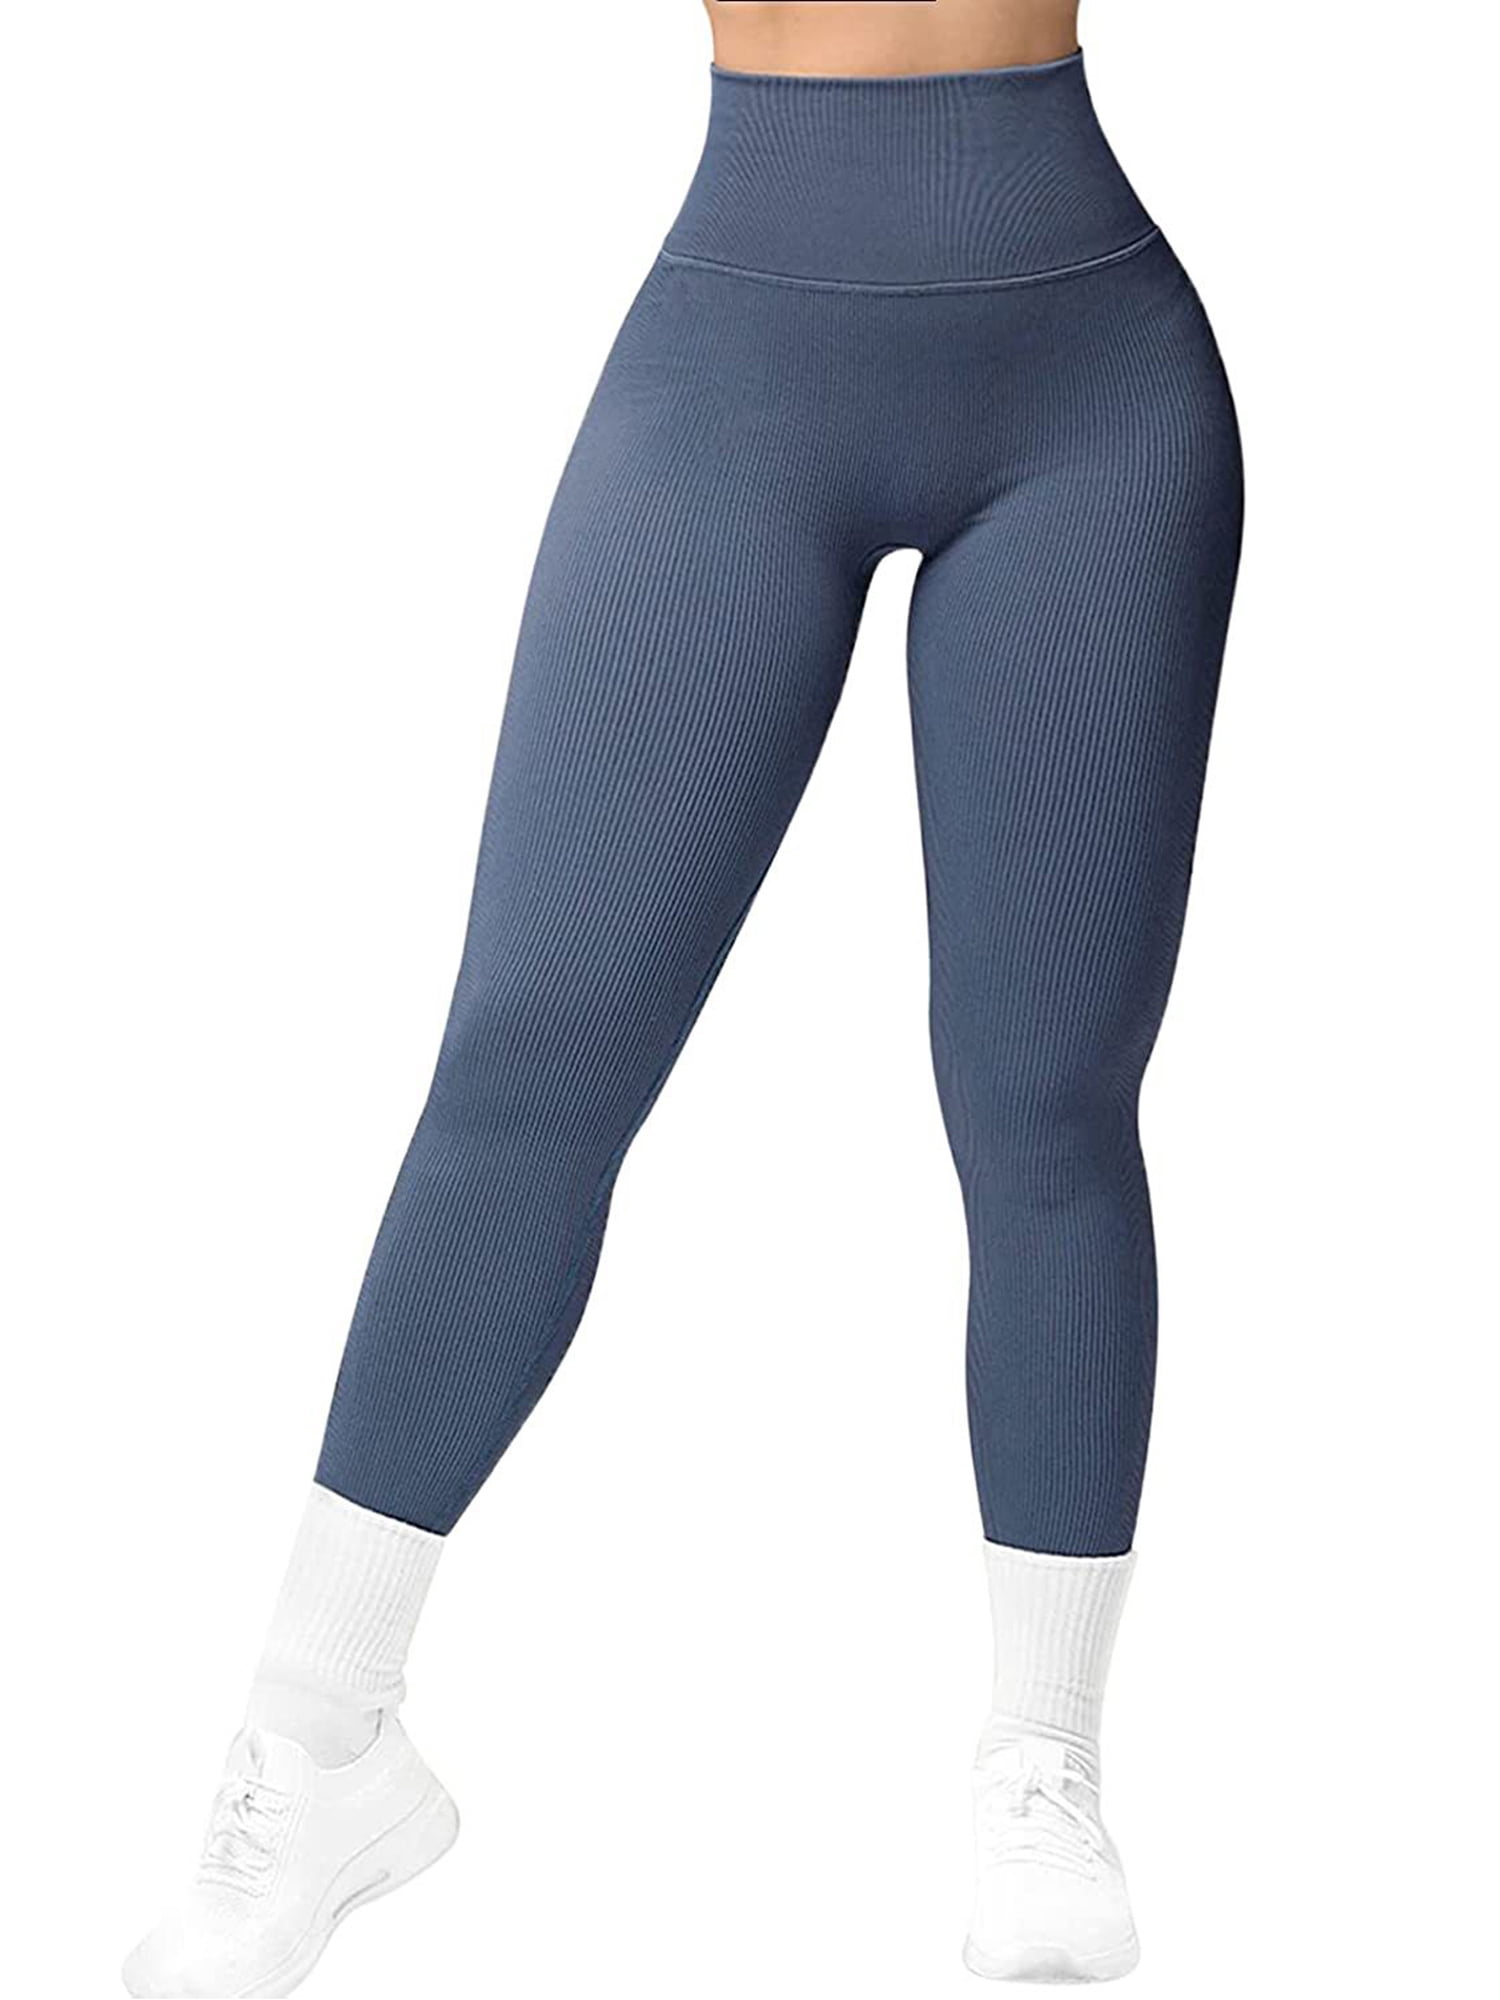  Soft Leggings For Women - High Waisted Tummy Control No See  Through Workout Yoga Pants